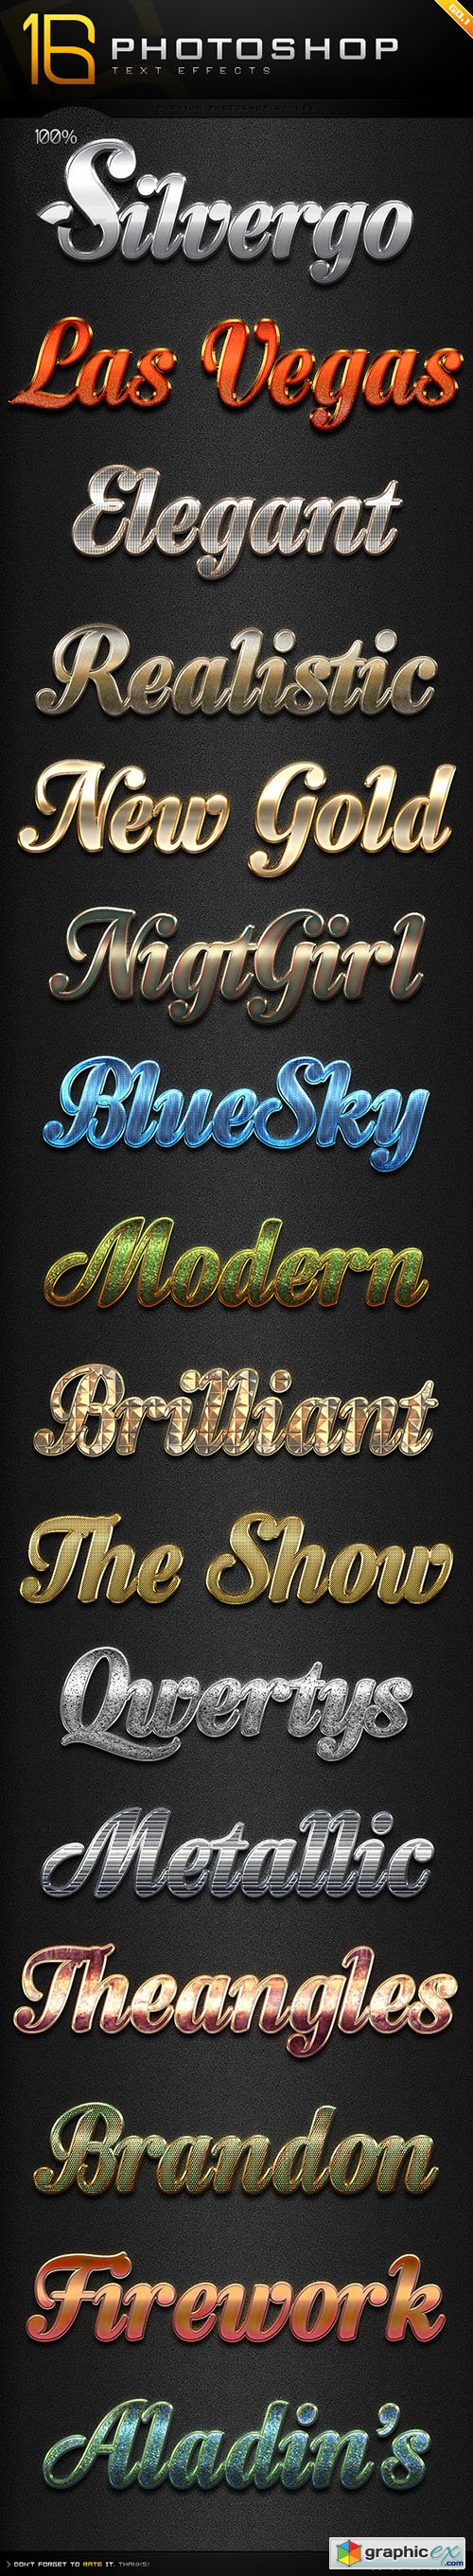 16 Photoshop Text Effect Styles GO 1